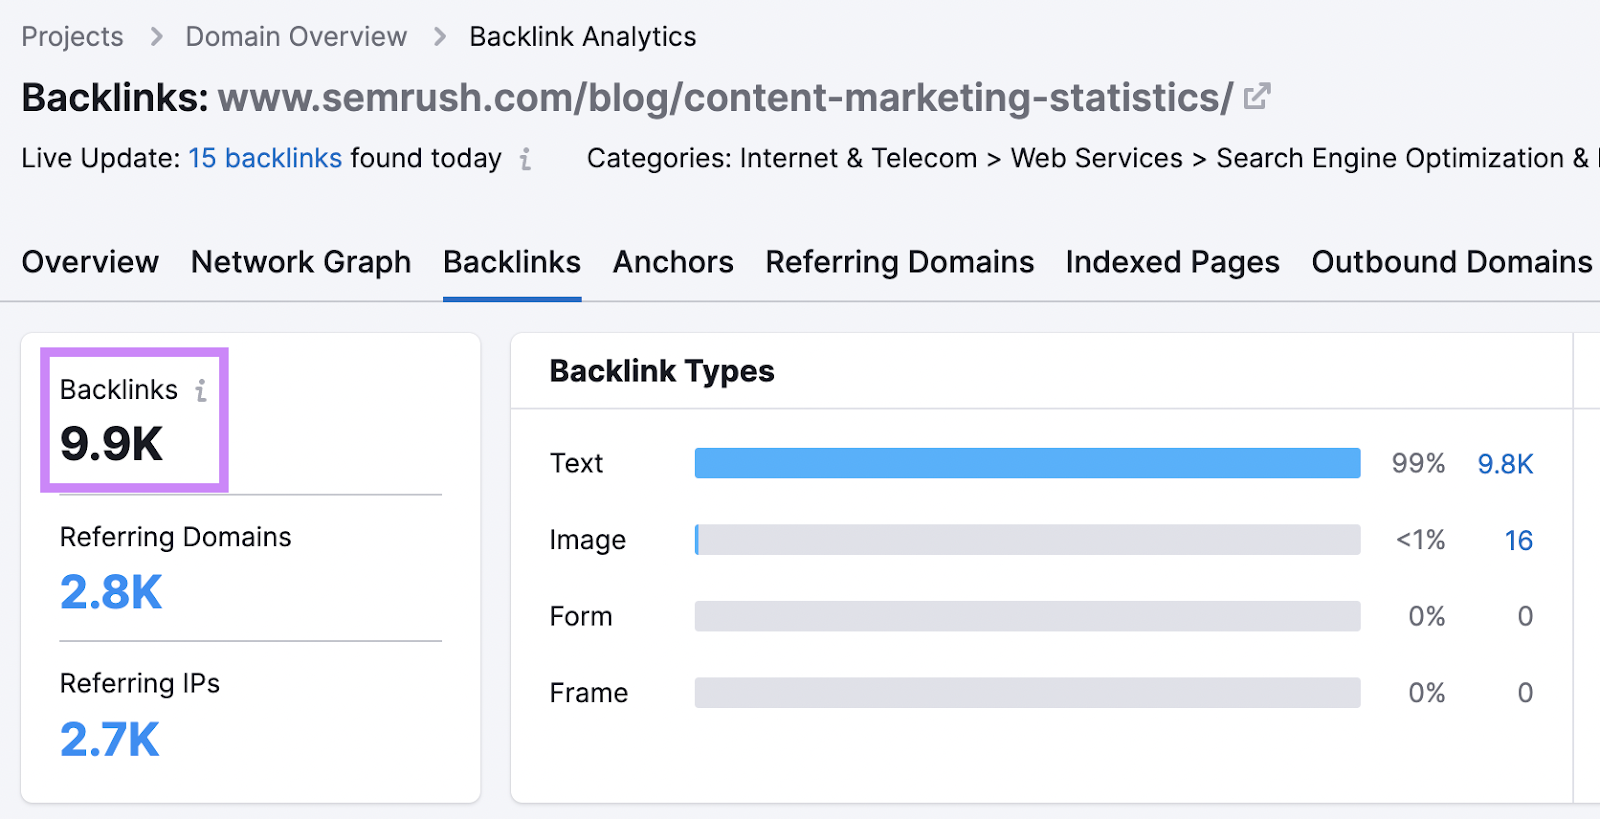 Backlink Analytics tool shows the article about statistics generated 9.9k backlinks